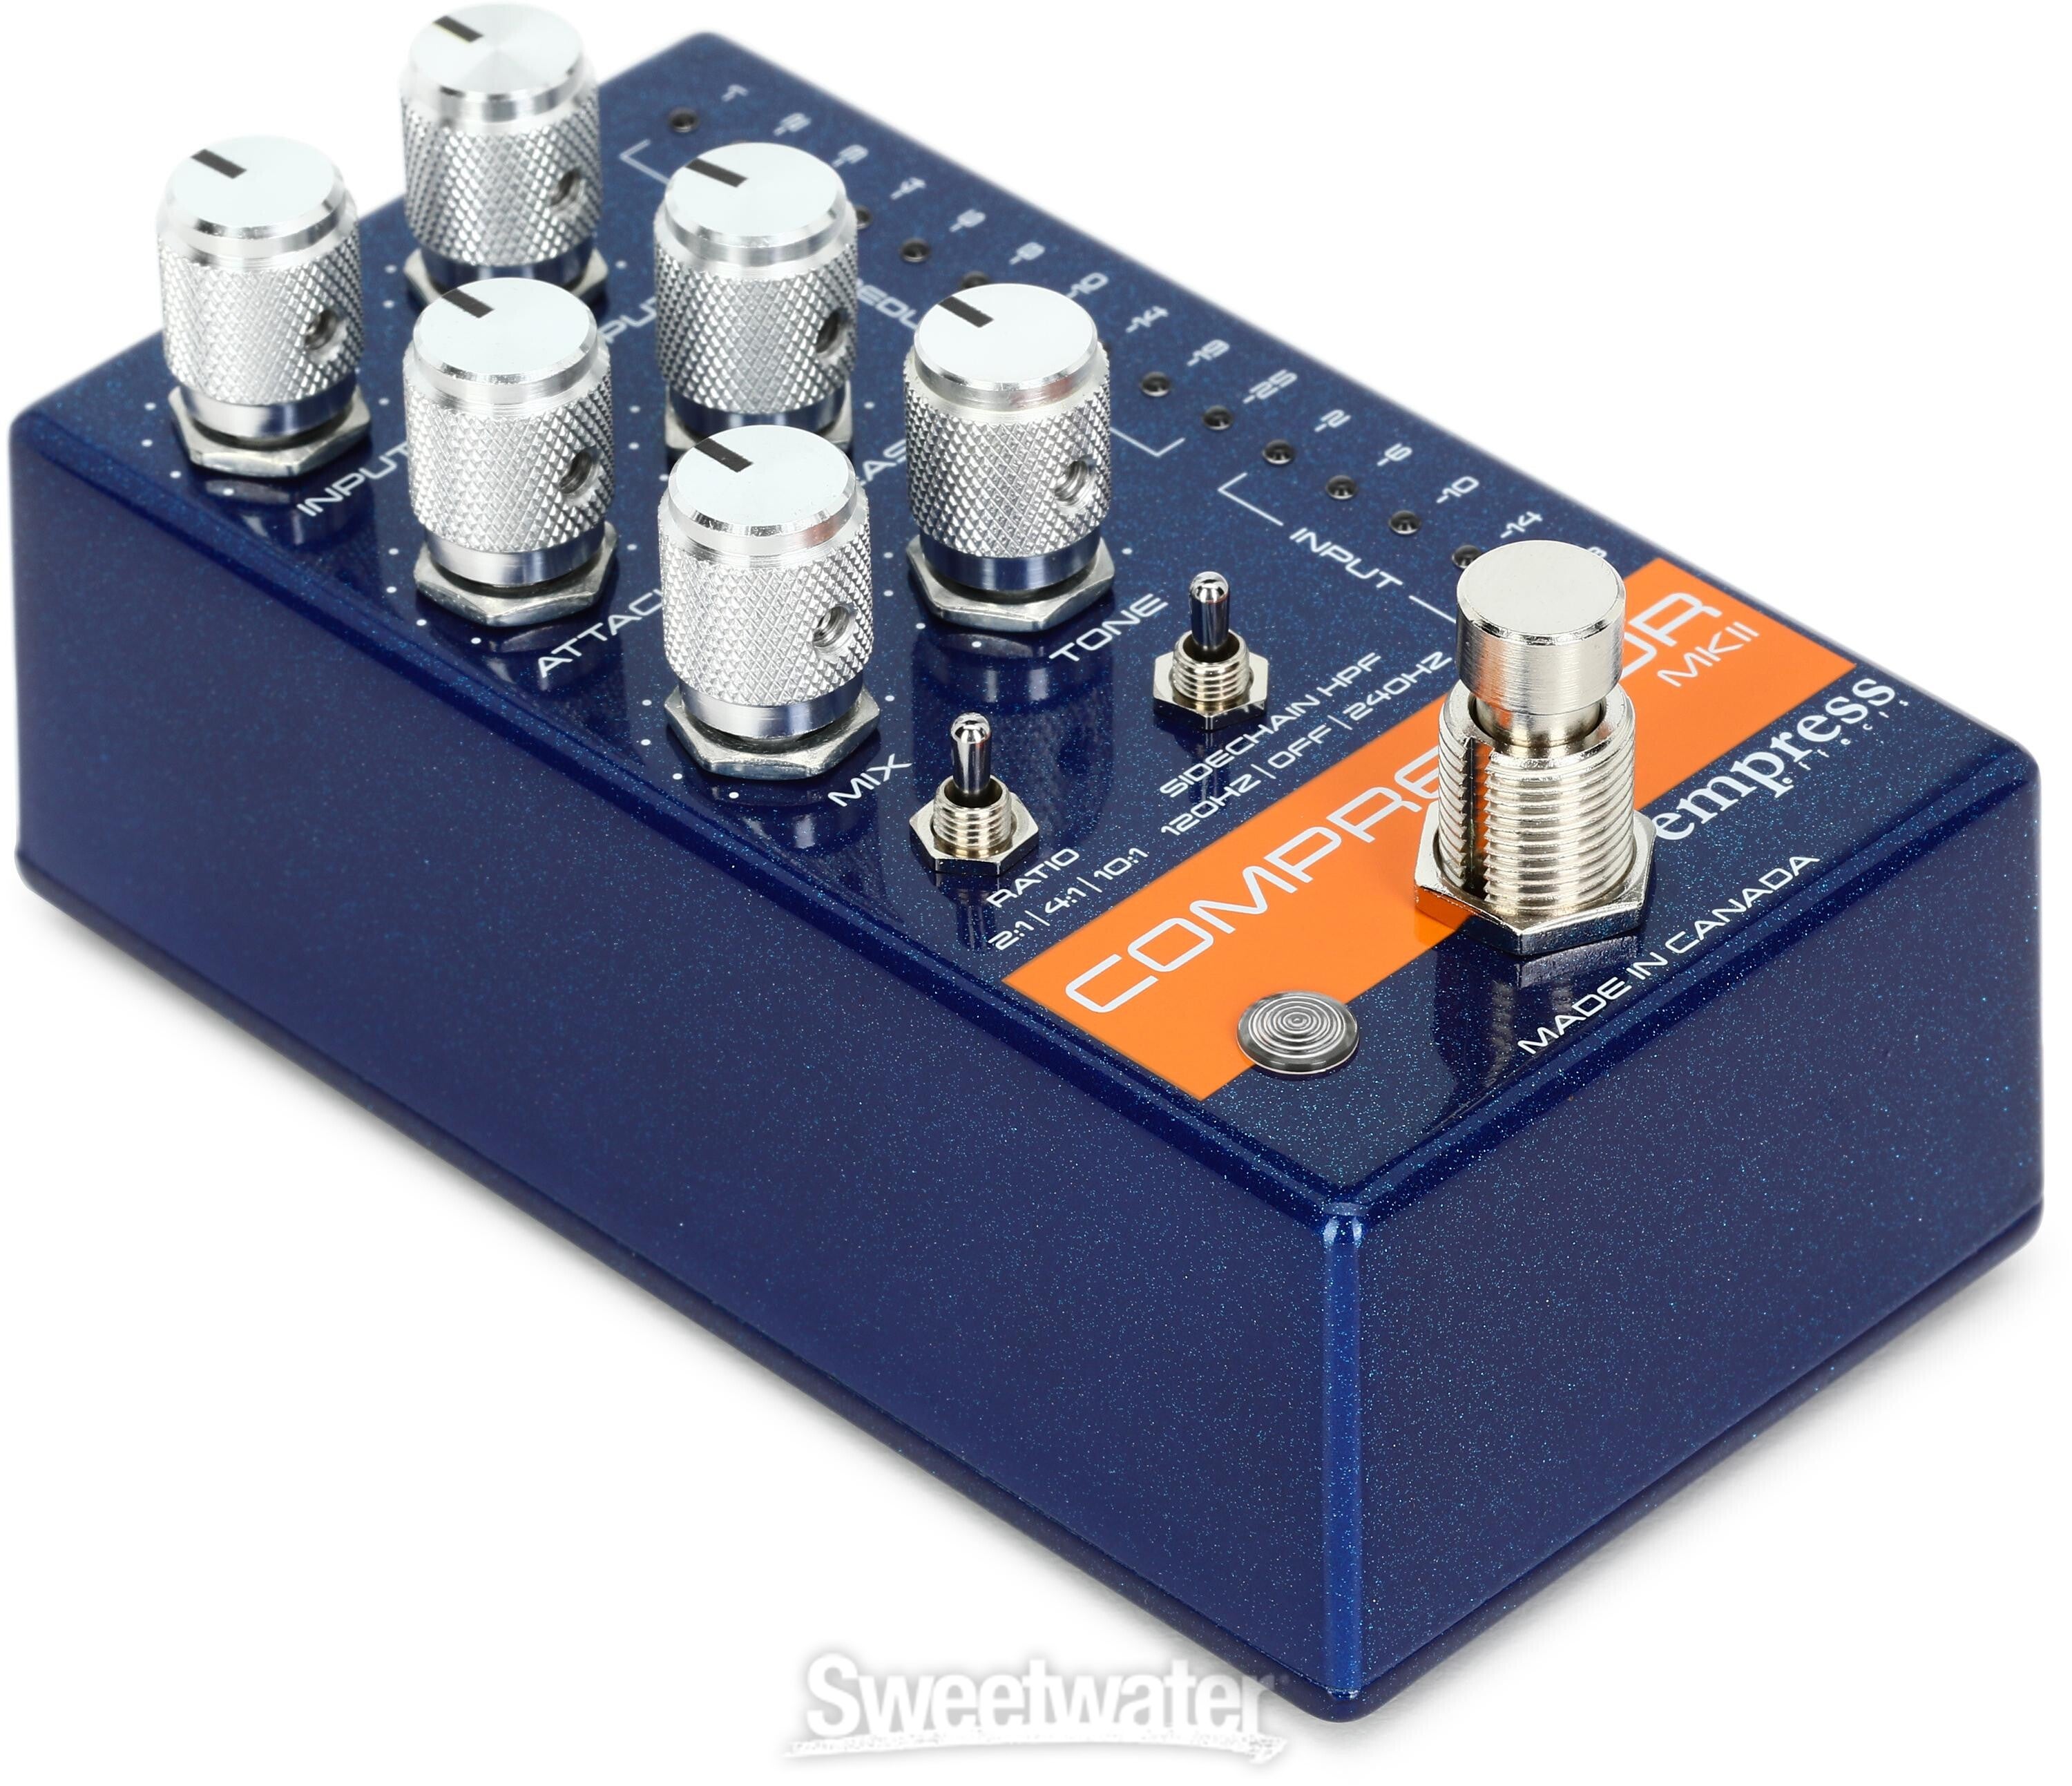 Empress Effects Guitar Compressor MKII Pedal - Blue | Sweetwater